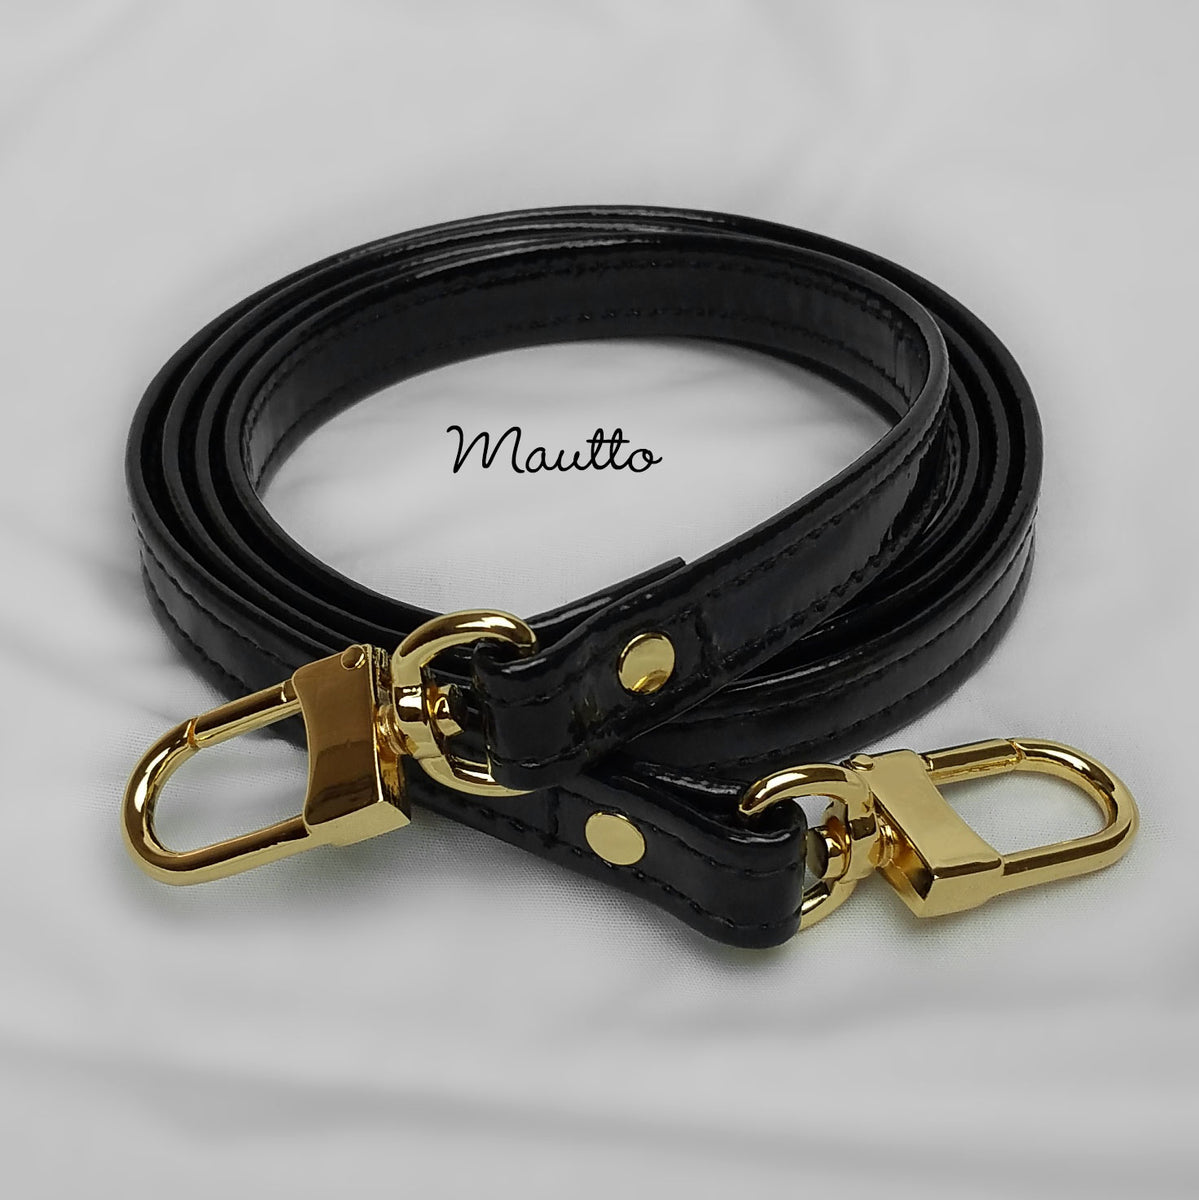 Extra Petite Adjustable Leather Strap 3/8 Inch 9mm Wide 